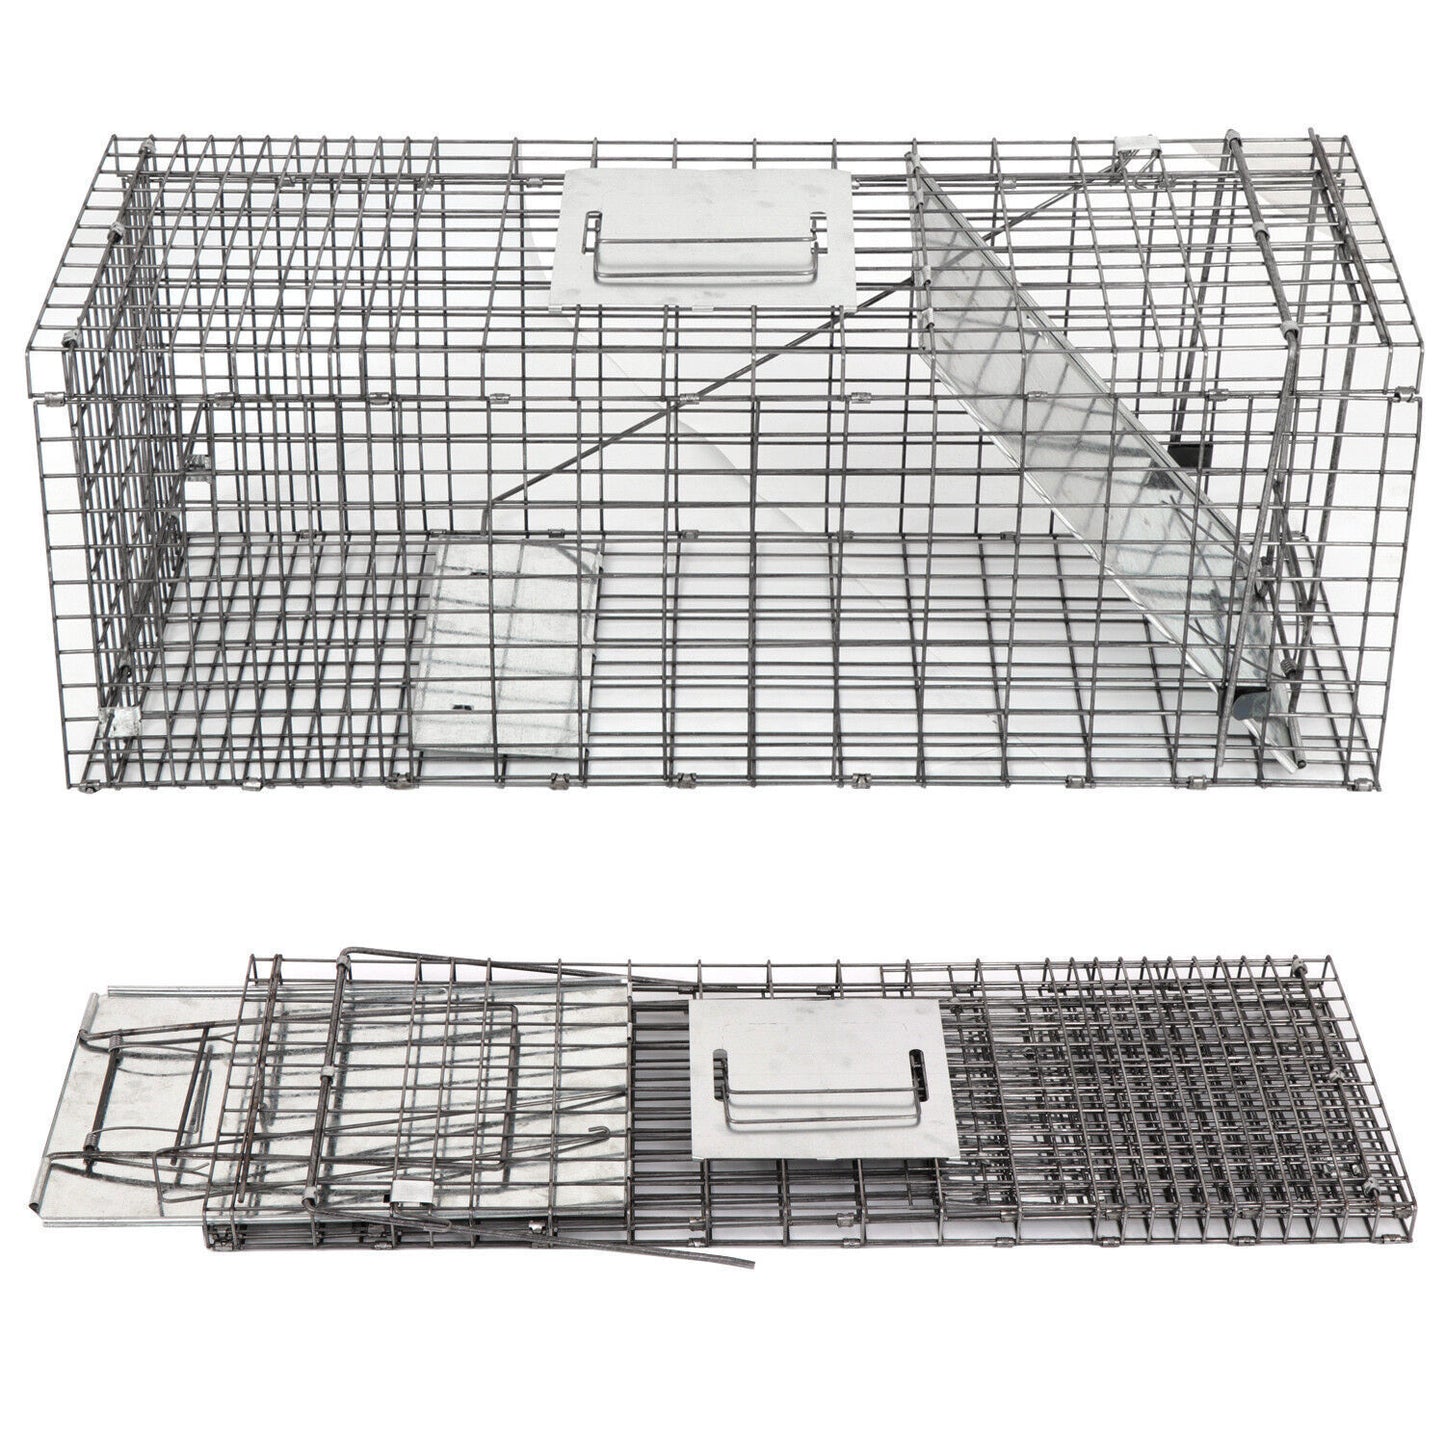 2X 32" Portable Preassembled Heavy Duty Metal Animal Trap Safe Design For Rodent